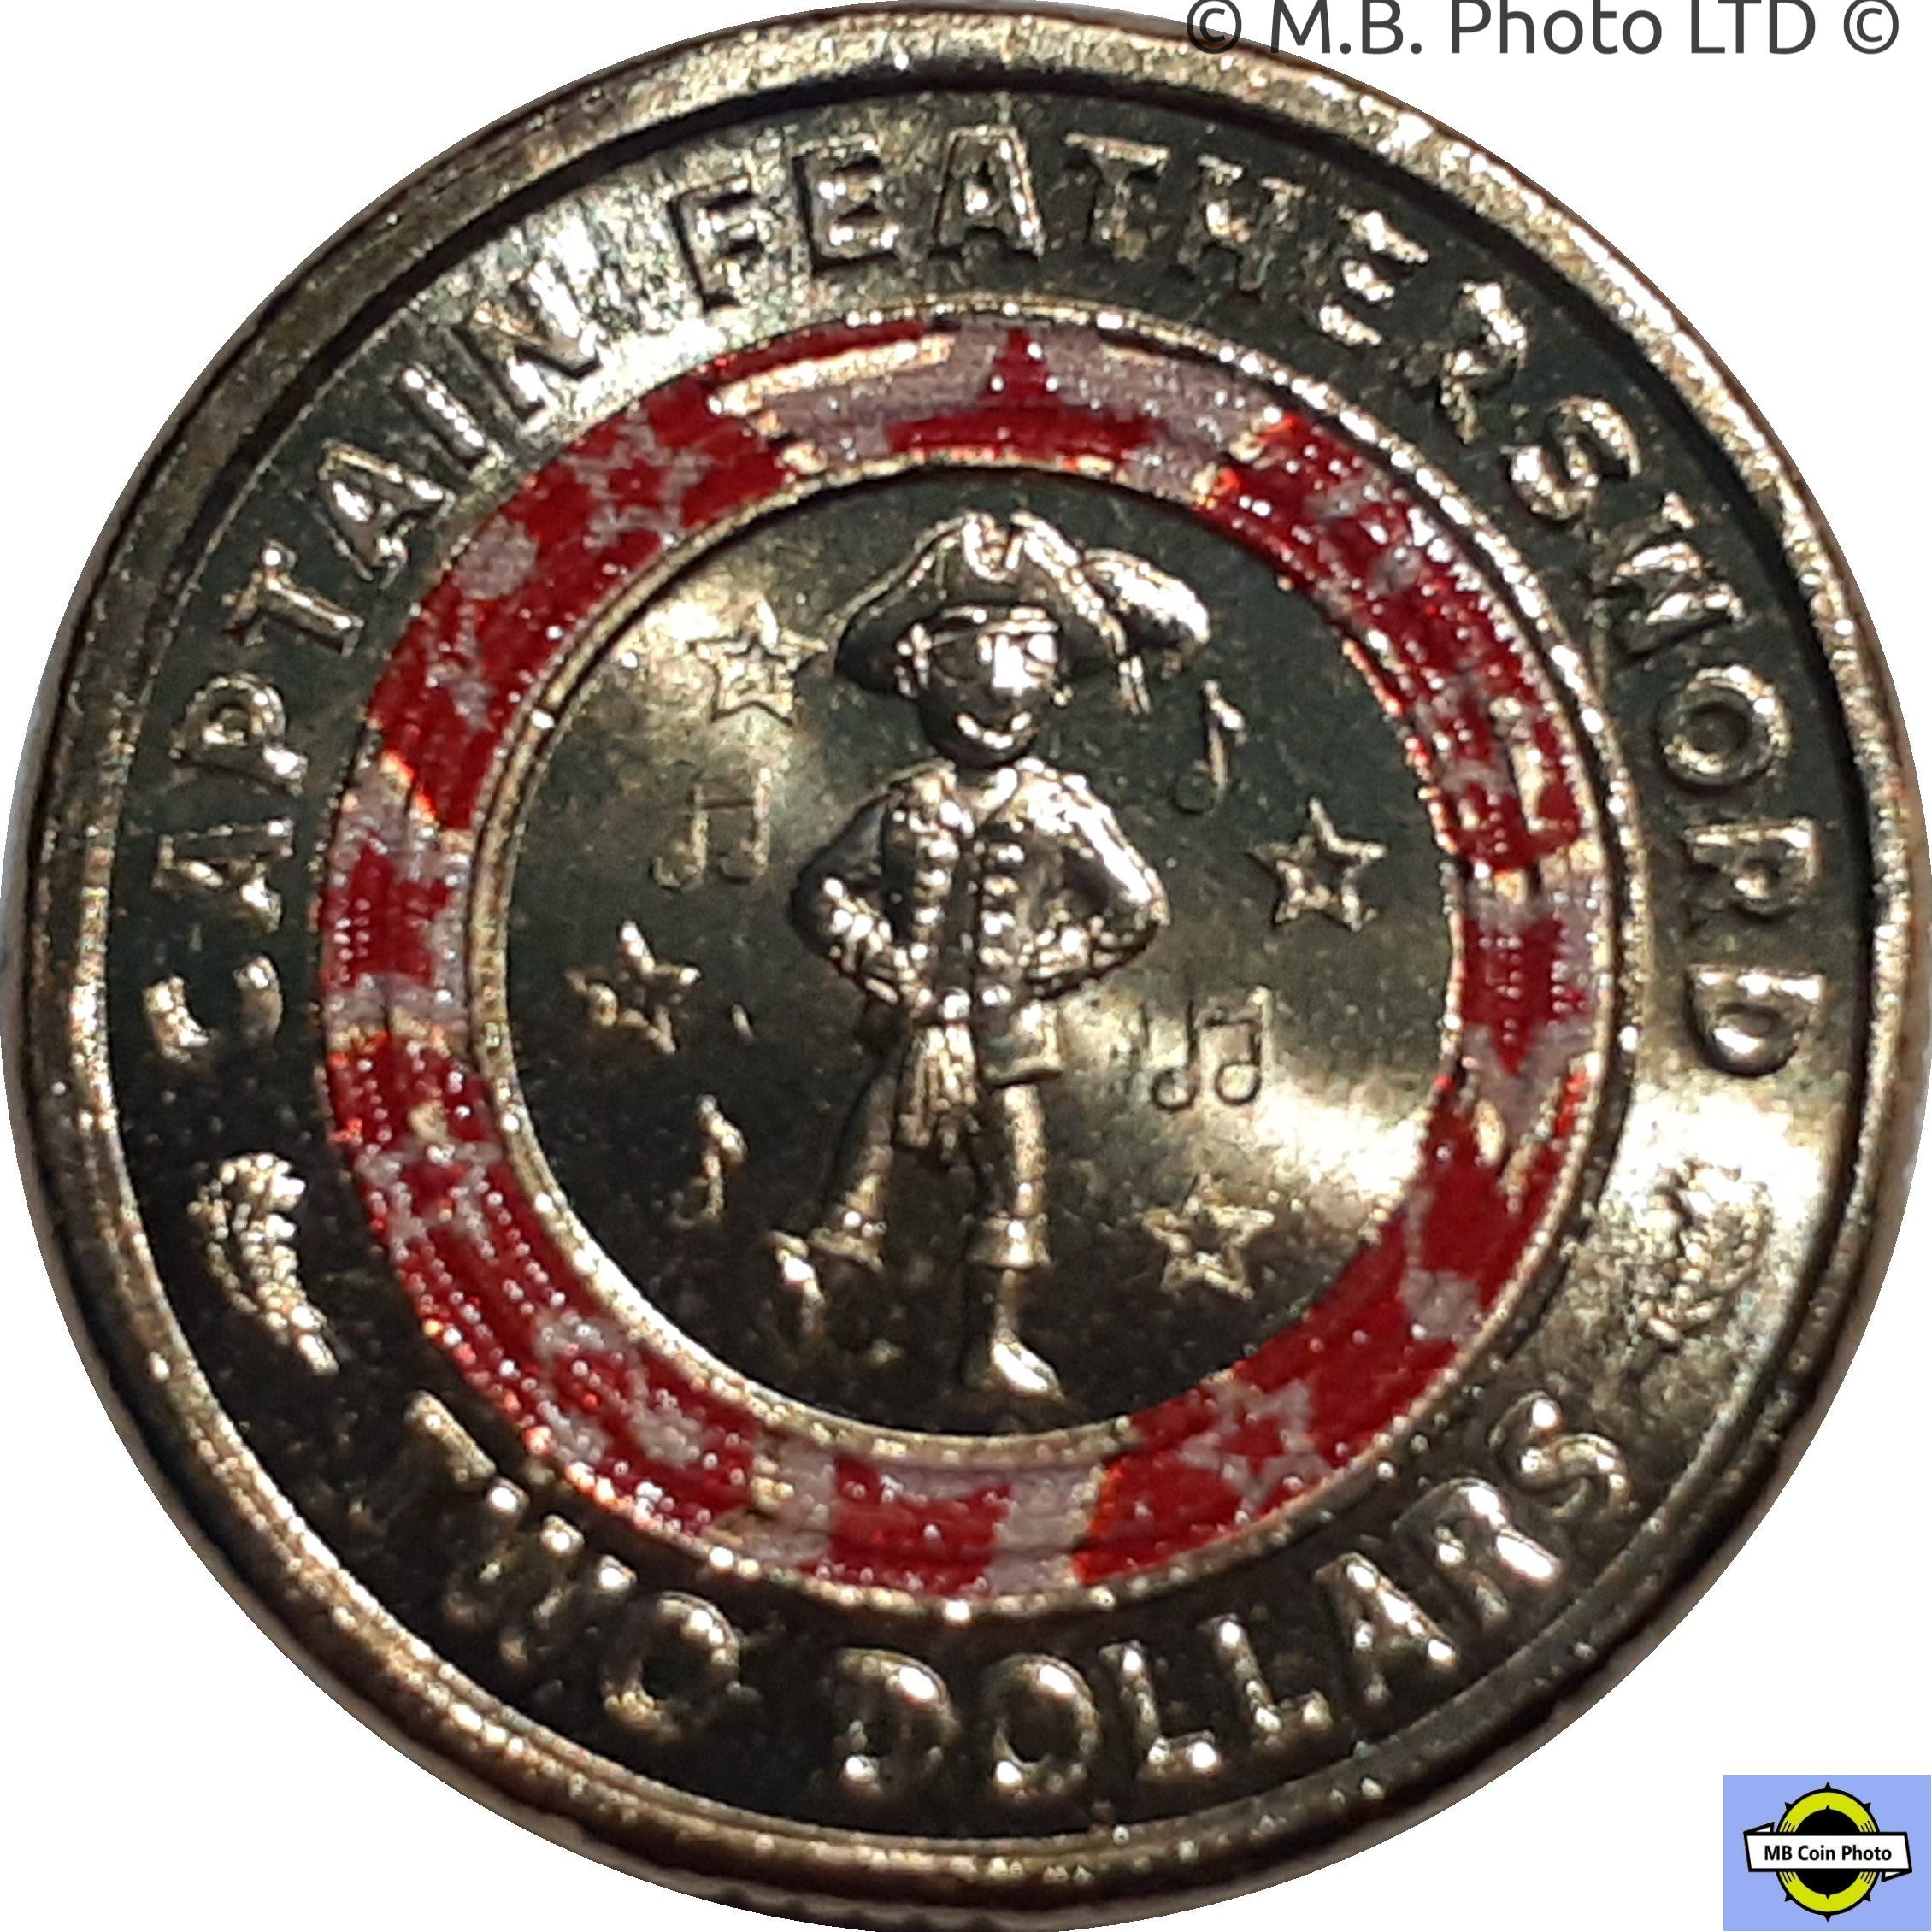 Two Dollars The Wiggles - Captain Feathersword (Red), Coin from Australia - Online Coin Club